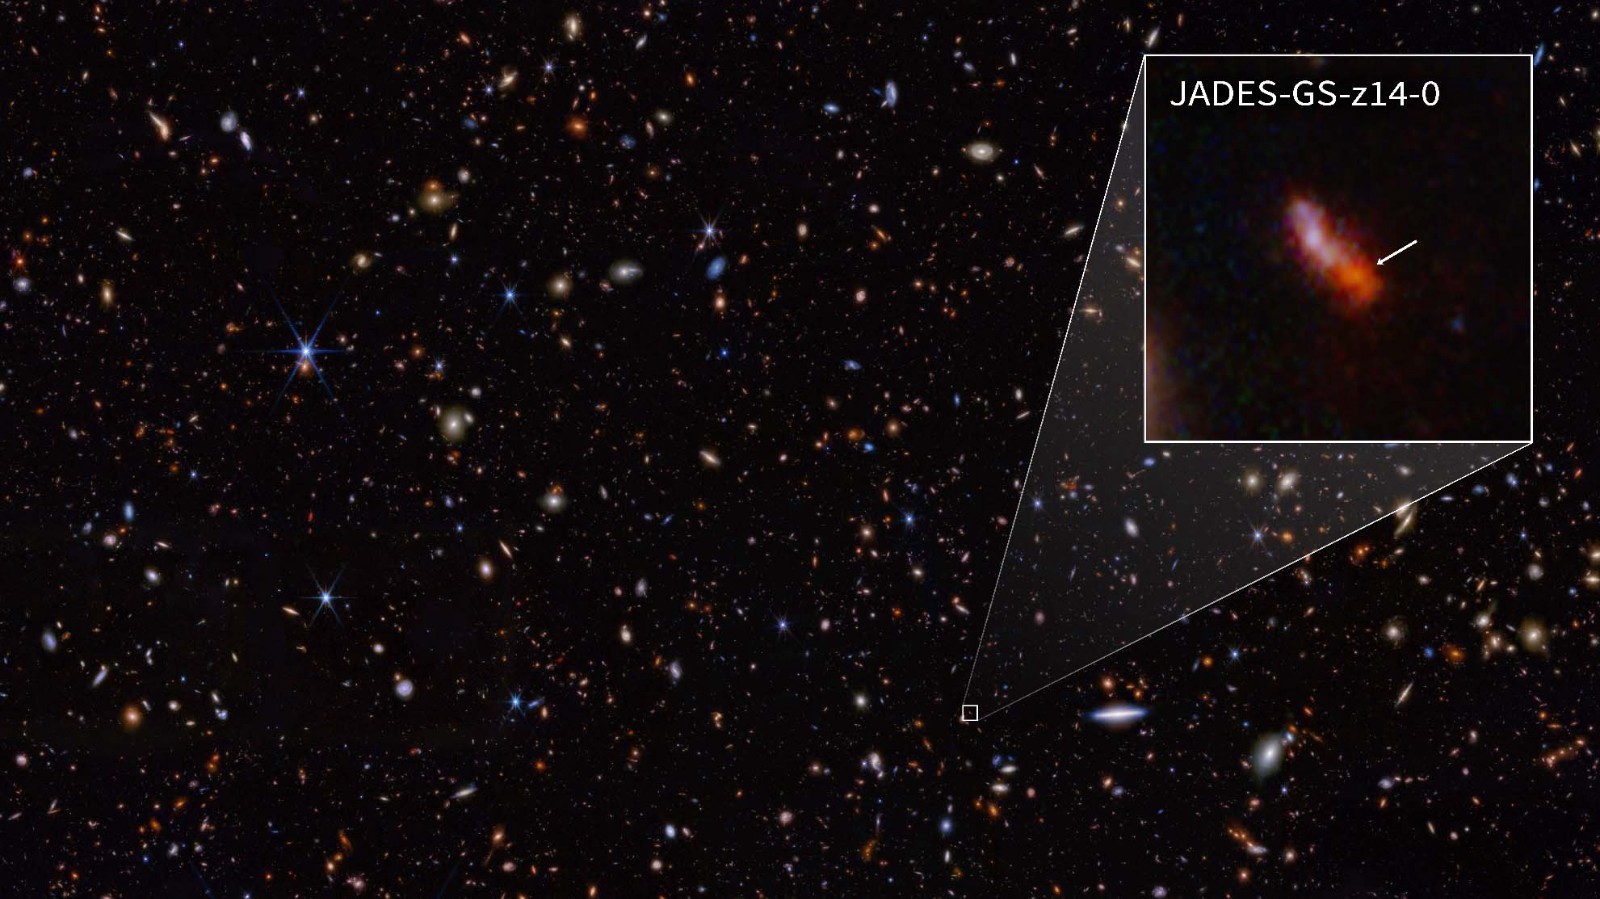 This infrared image from NASA's James Webb Space Telescope (JWST) was taken by the NIRCam (Near-Infrared Camera) for the JWST Advanced Deep Extragalactic Survey program. /NASA